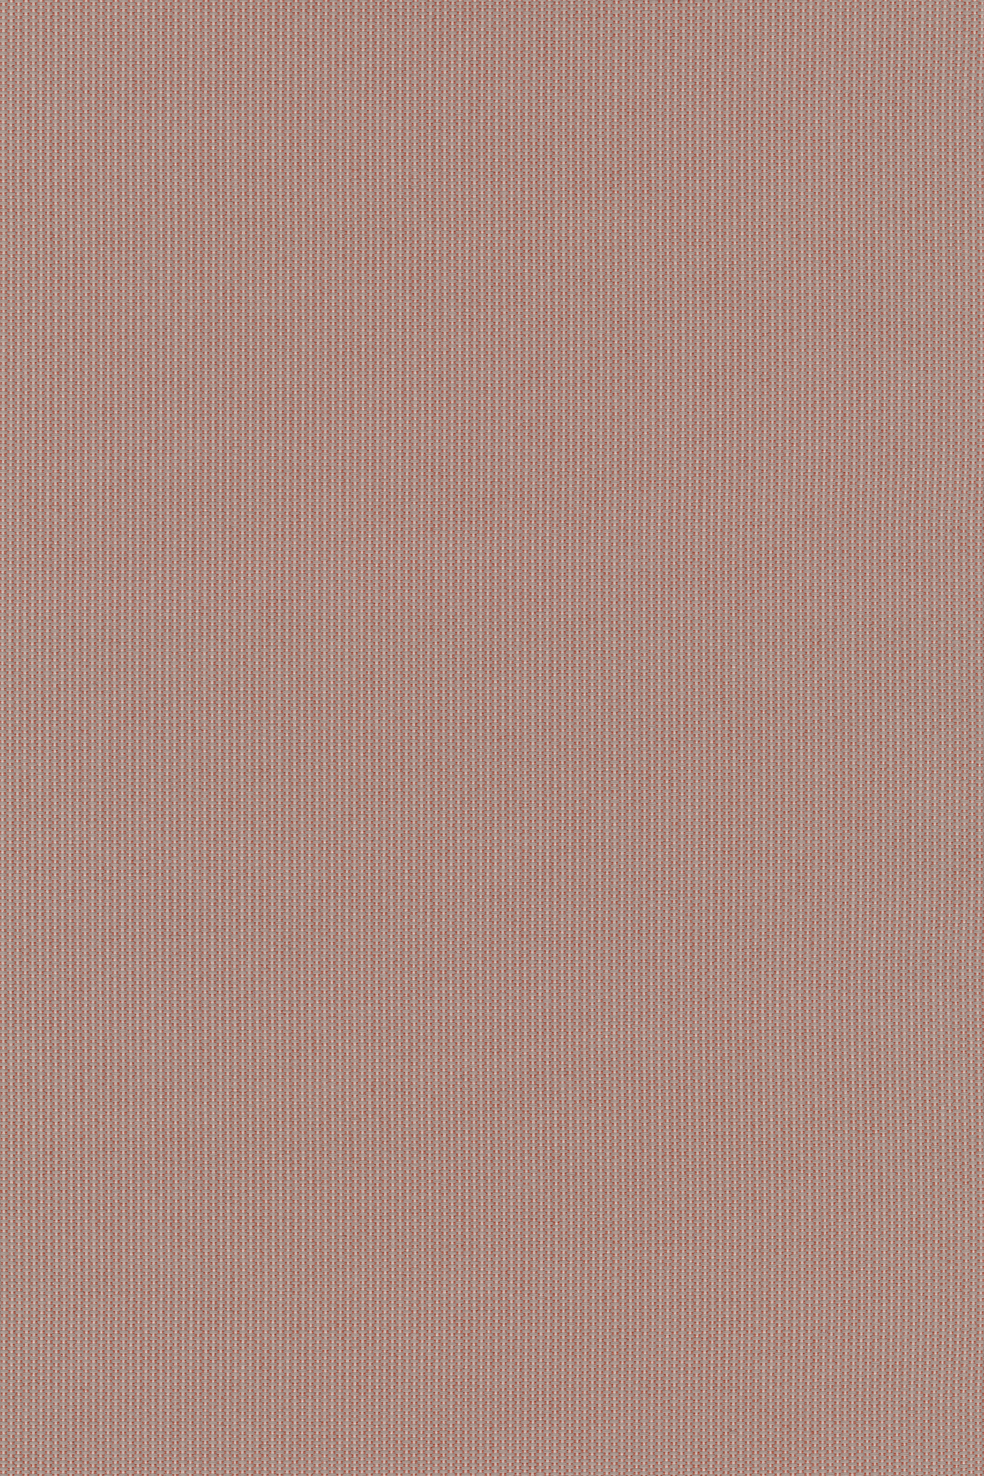 Fabric sample Patio Outdoor 340 pink